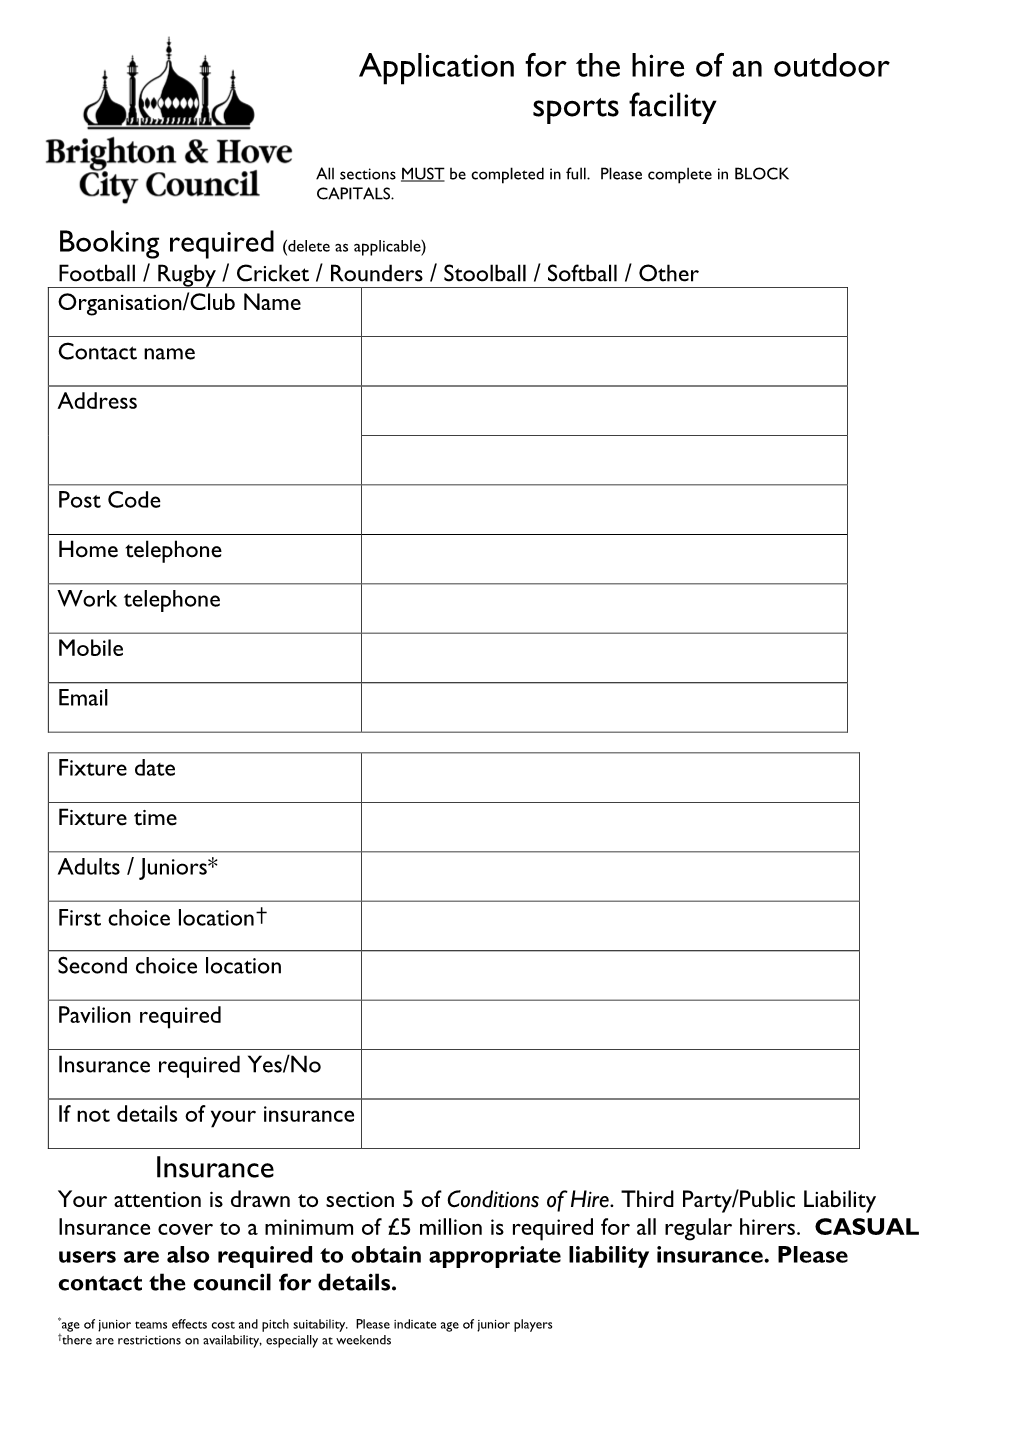 Application Form for All Outdoor Sports Facilities